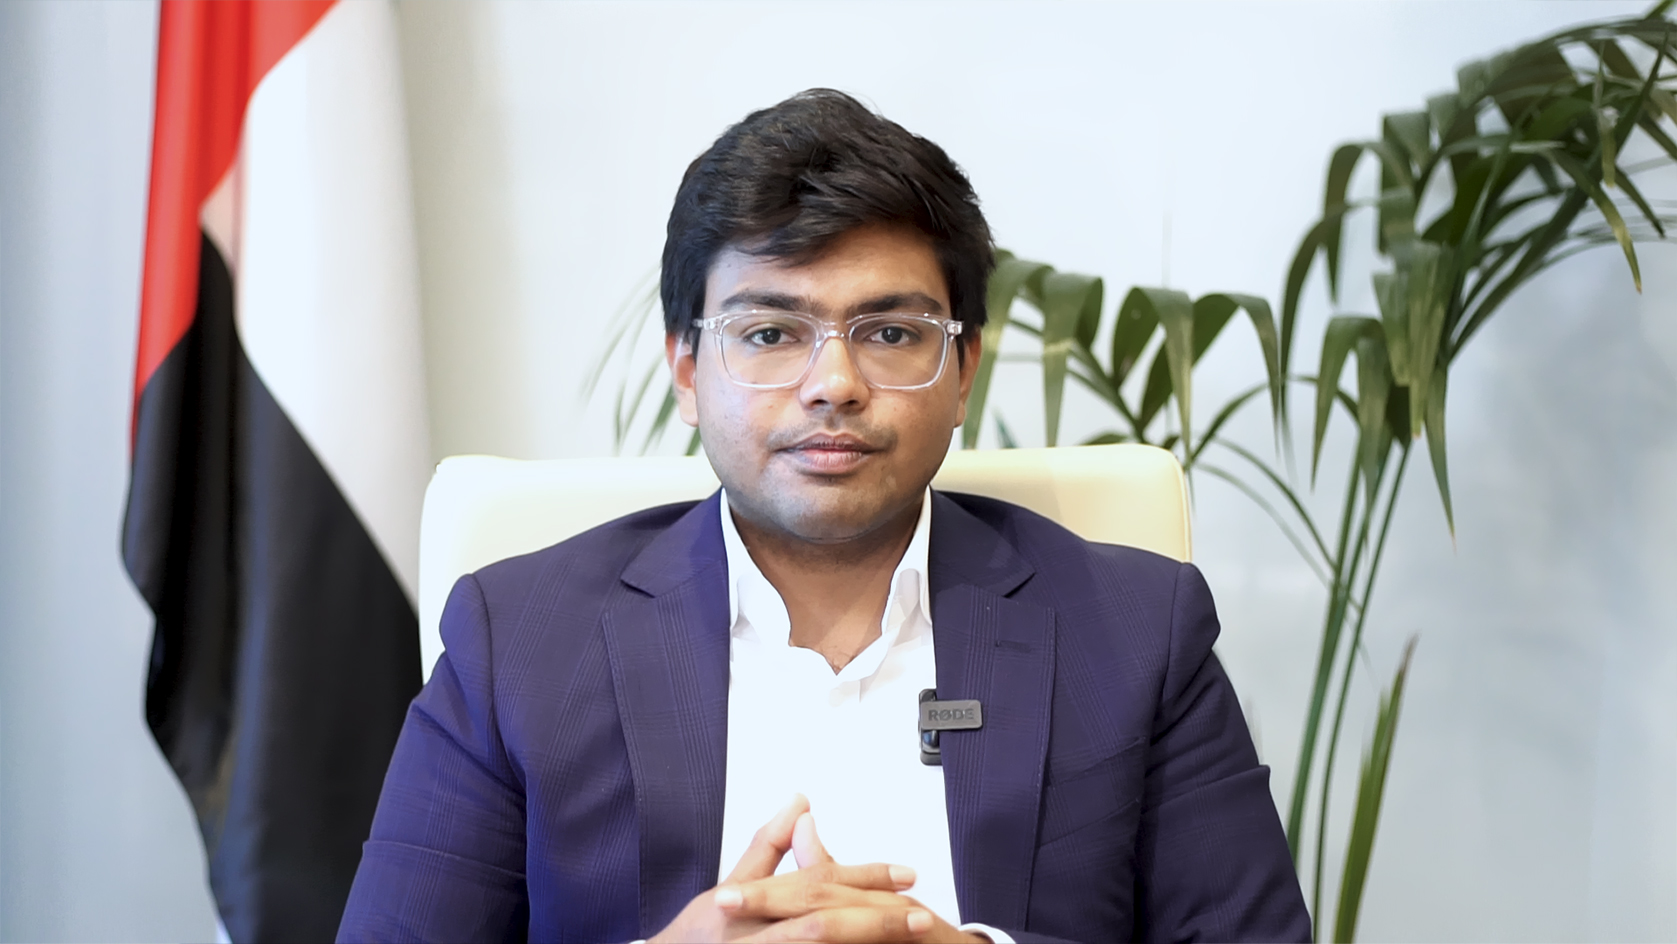 About Groyyo: Interview with the CEO Subin Mitra